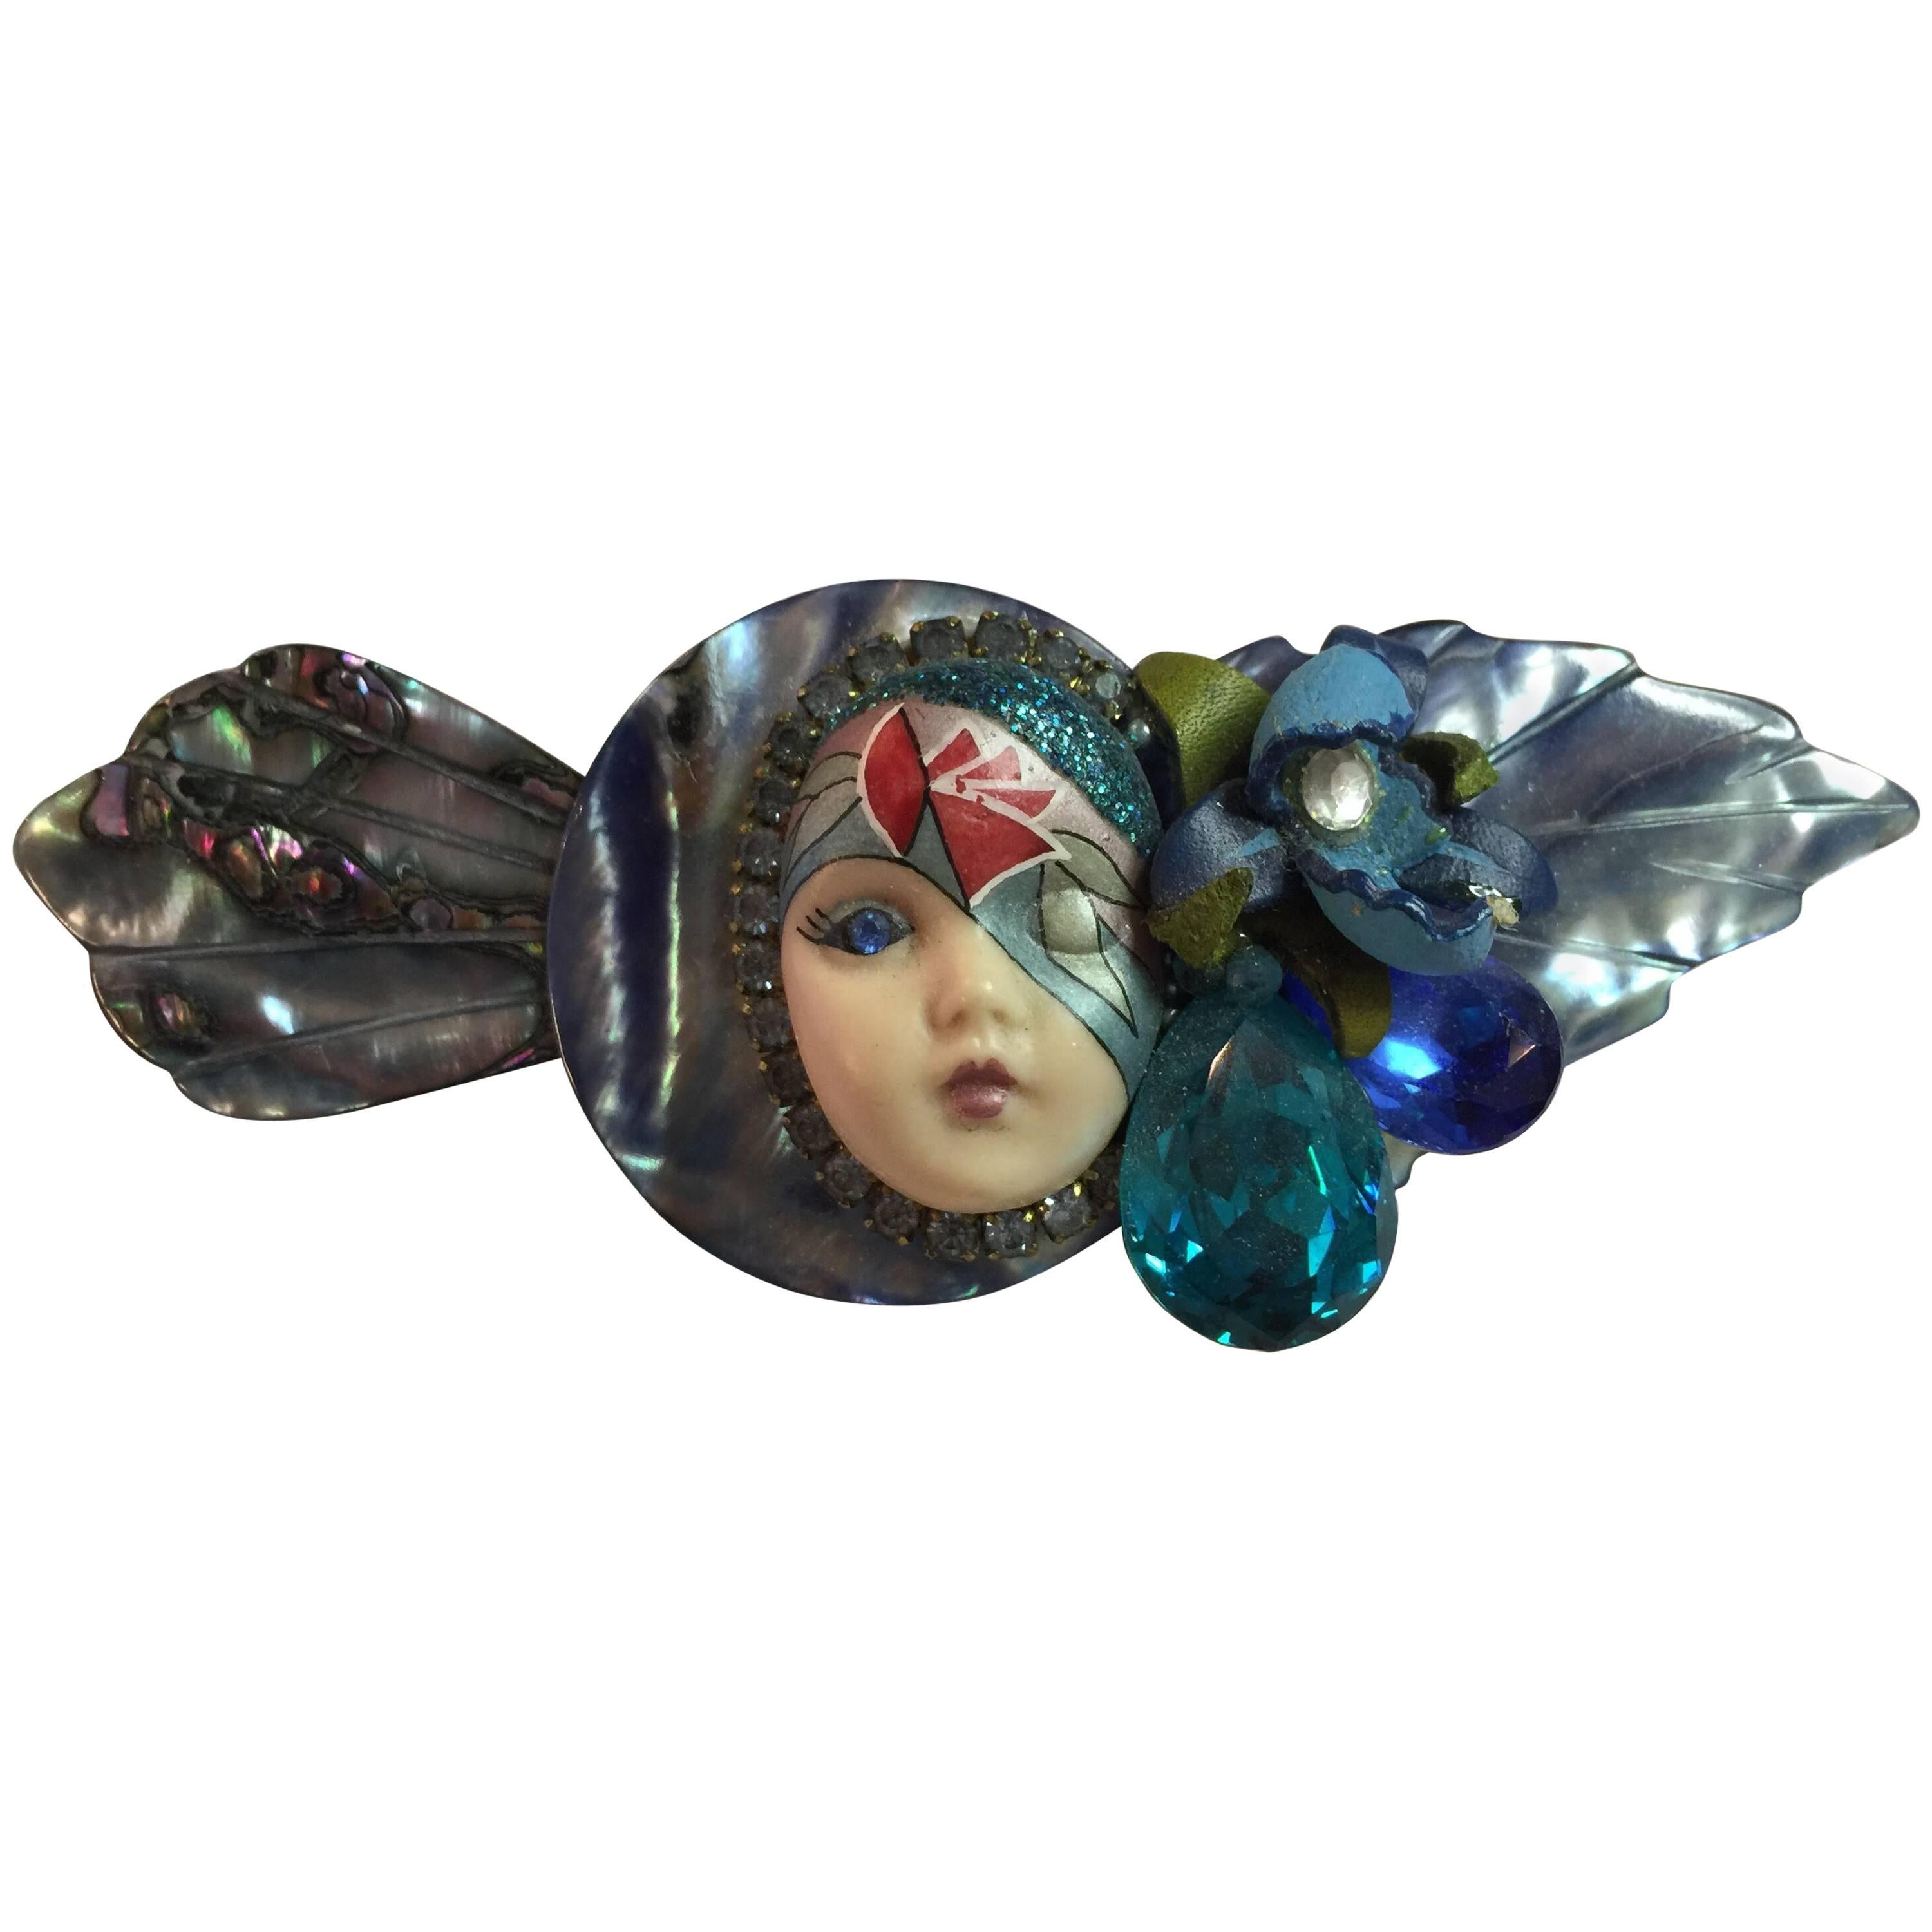 1980s WENDY GELL Fantasy Flapper DIVA Brooch Pin For Sale